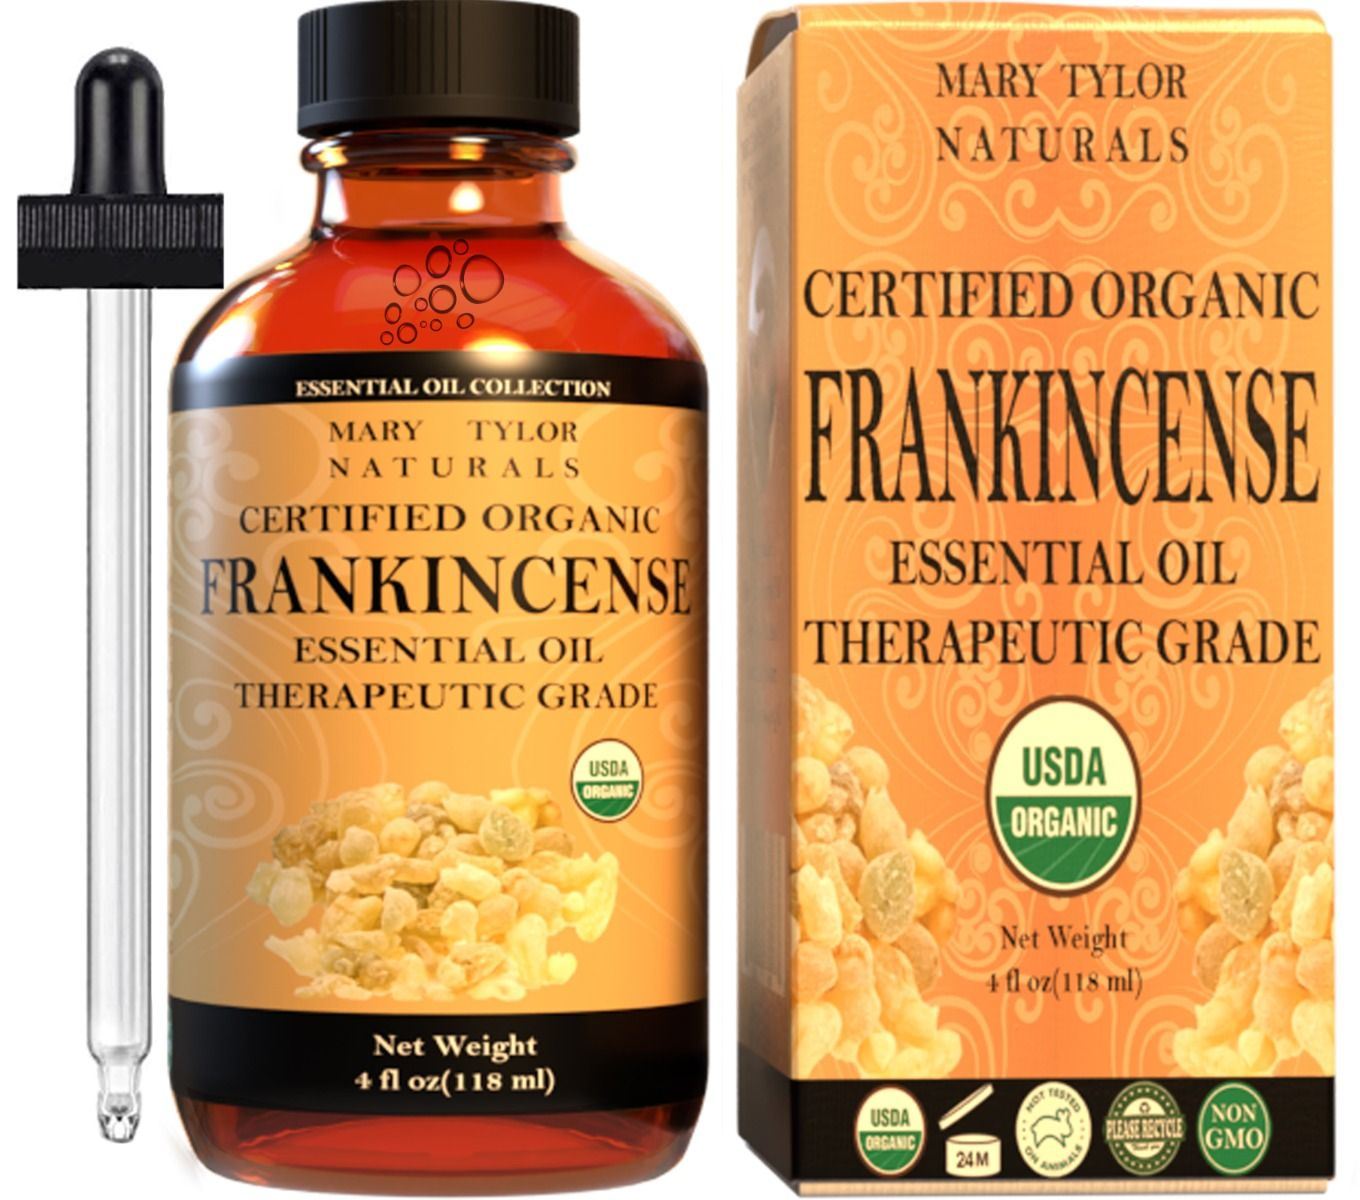 H'ana Frankincense Essential Oil for Body Comfort - 100% Natural Frankincense  Oil for Skin - Frankincense Oil for Face & Diffuser (1 fl oz) - Yahoo  Shopping